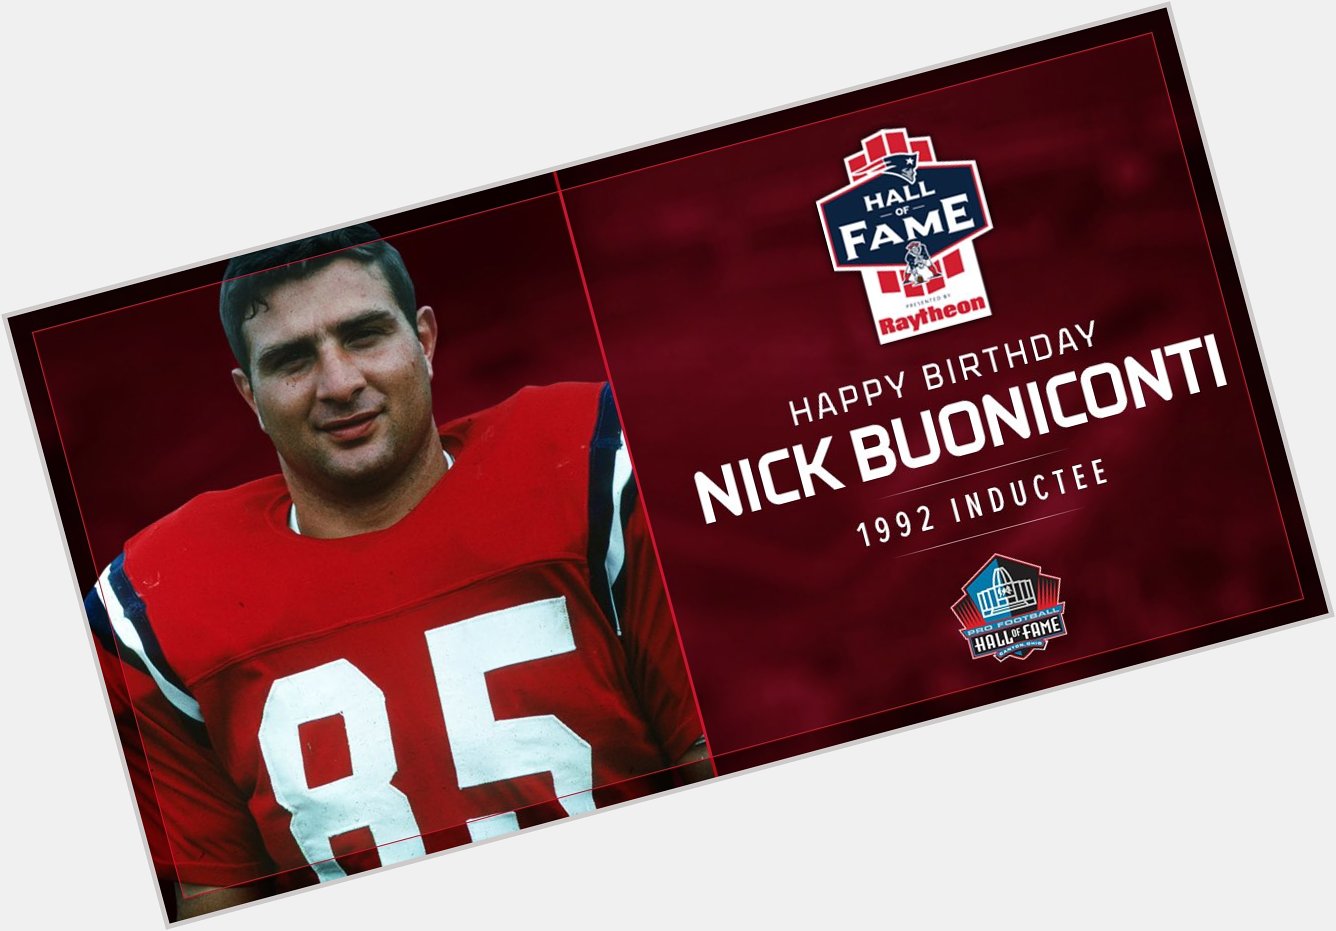  Happy Birthday to Nick Buoniconti! A member of the Hall of Fame and the  